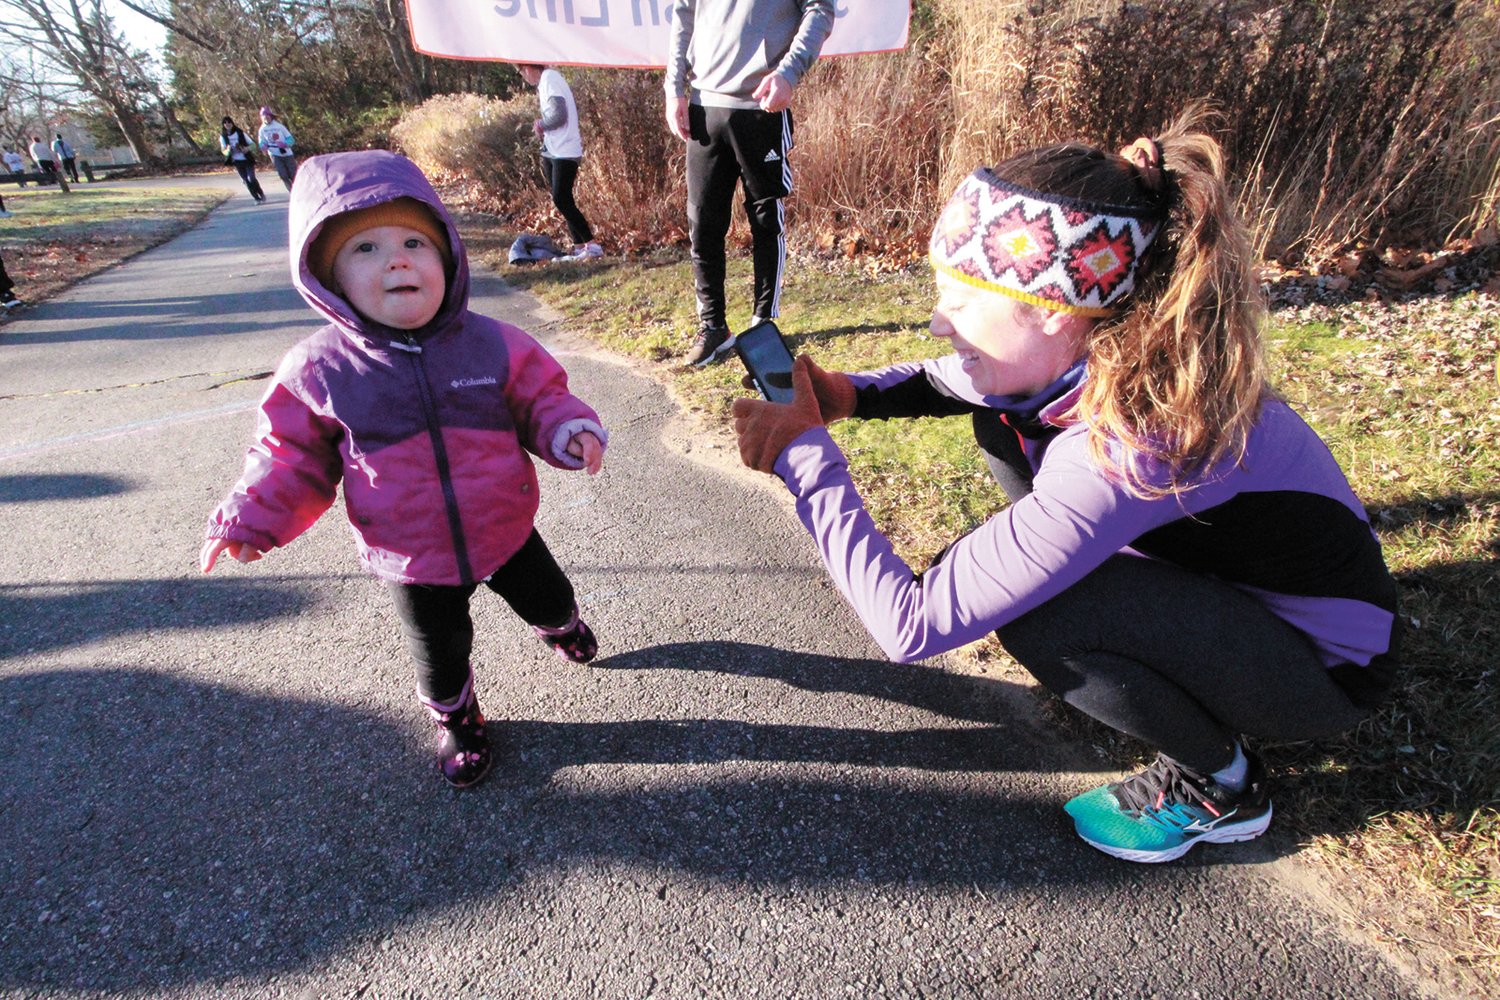 ACROSS THE FINISH LINE: Nineteen-month old Everly Speed is encouraged by her mother Kayla as she steps across the finish.